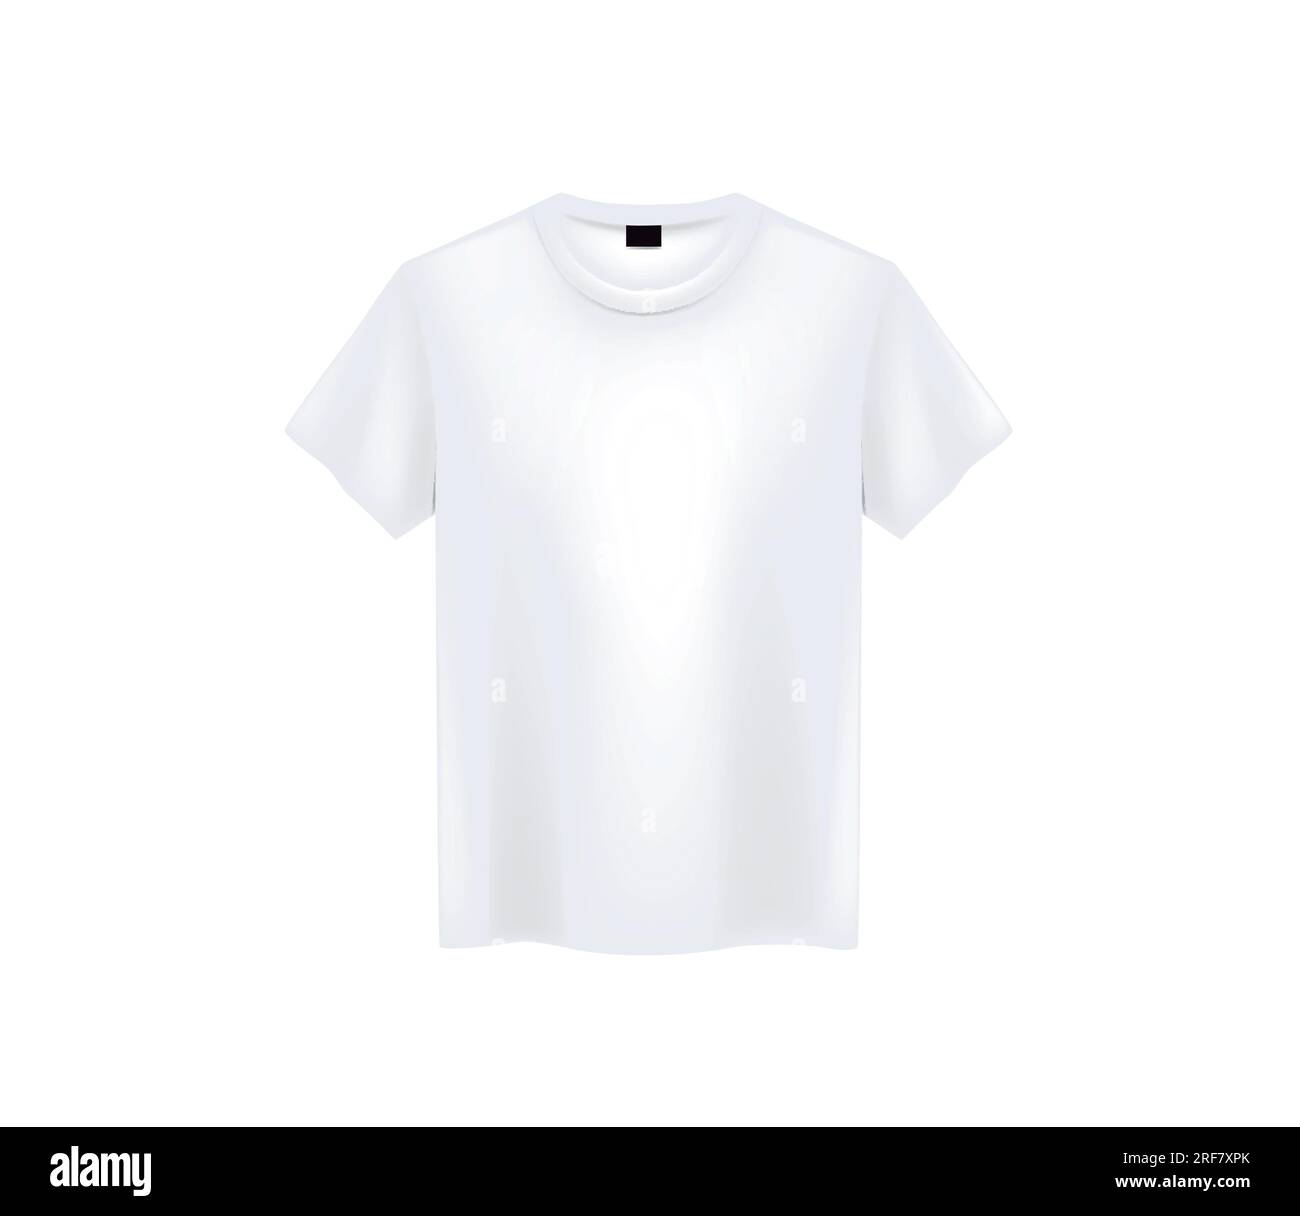 Front view of men's white t-shirt Mock-up on white background. Short sleeve T-shirt template on background. Stock Vector